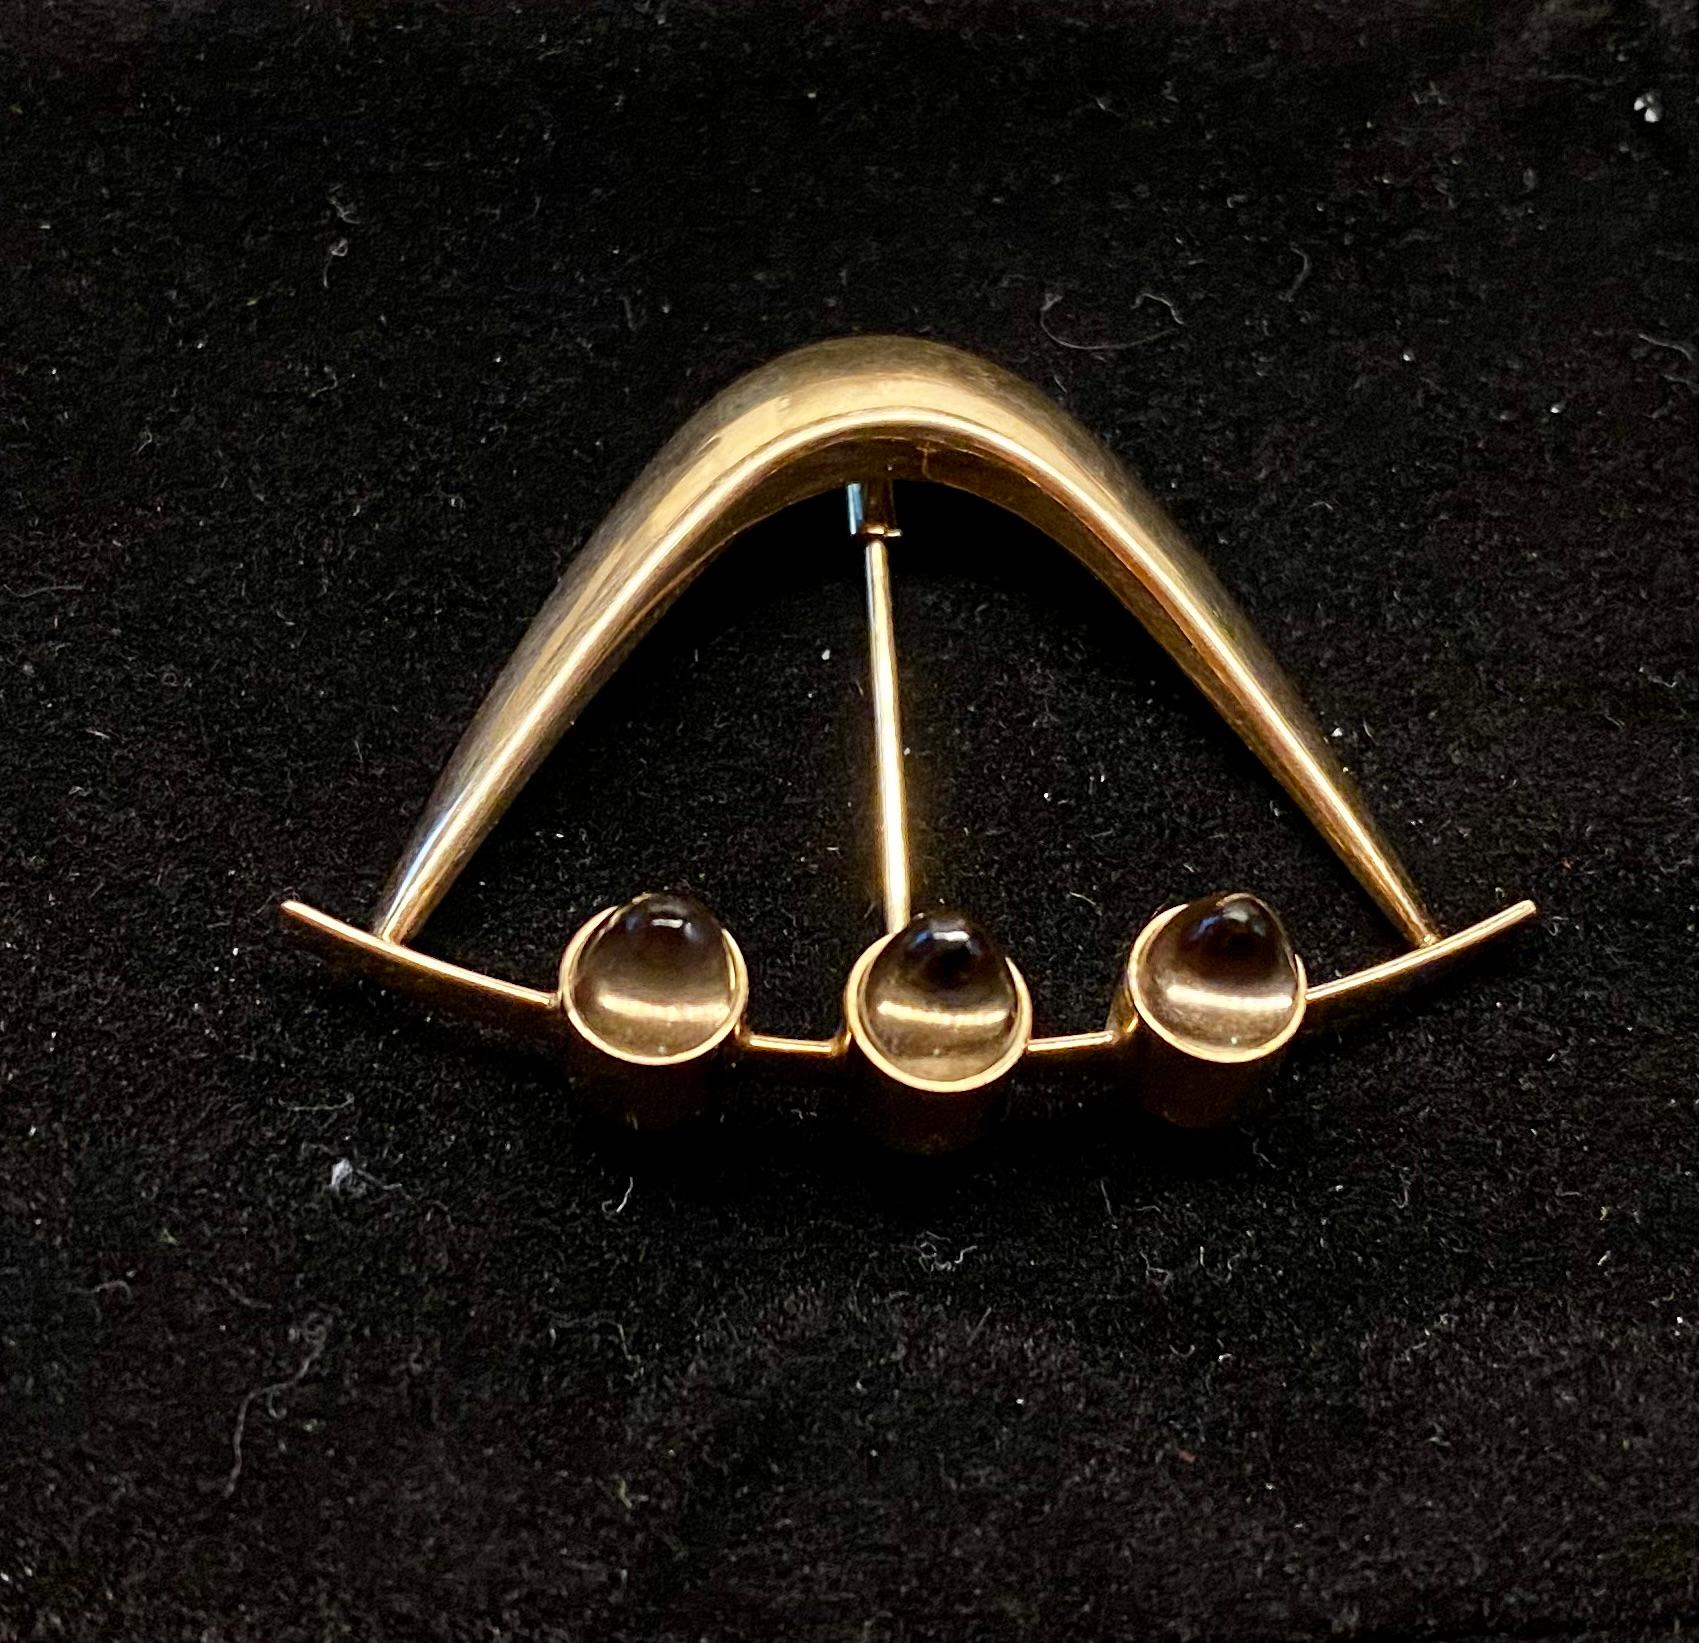 Brooch by Elis Kauppi for Kupittaan Kulta, Finland, 1958.
Fine and Rare Finland Jewelry
Smoky quartz
Gold 585
Last picture from Kupittaan Kulta old catalog.
Elis Kauppi
Uno Elis Kauppi was a Finnish jewelry designer. He was initially a student of